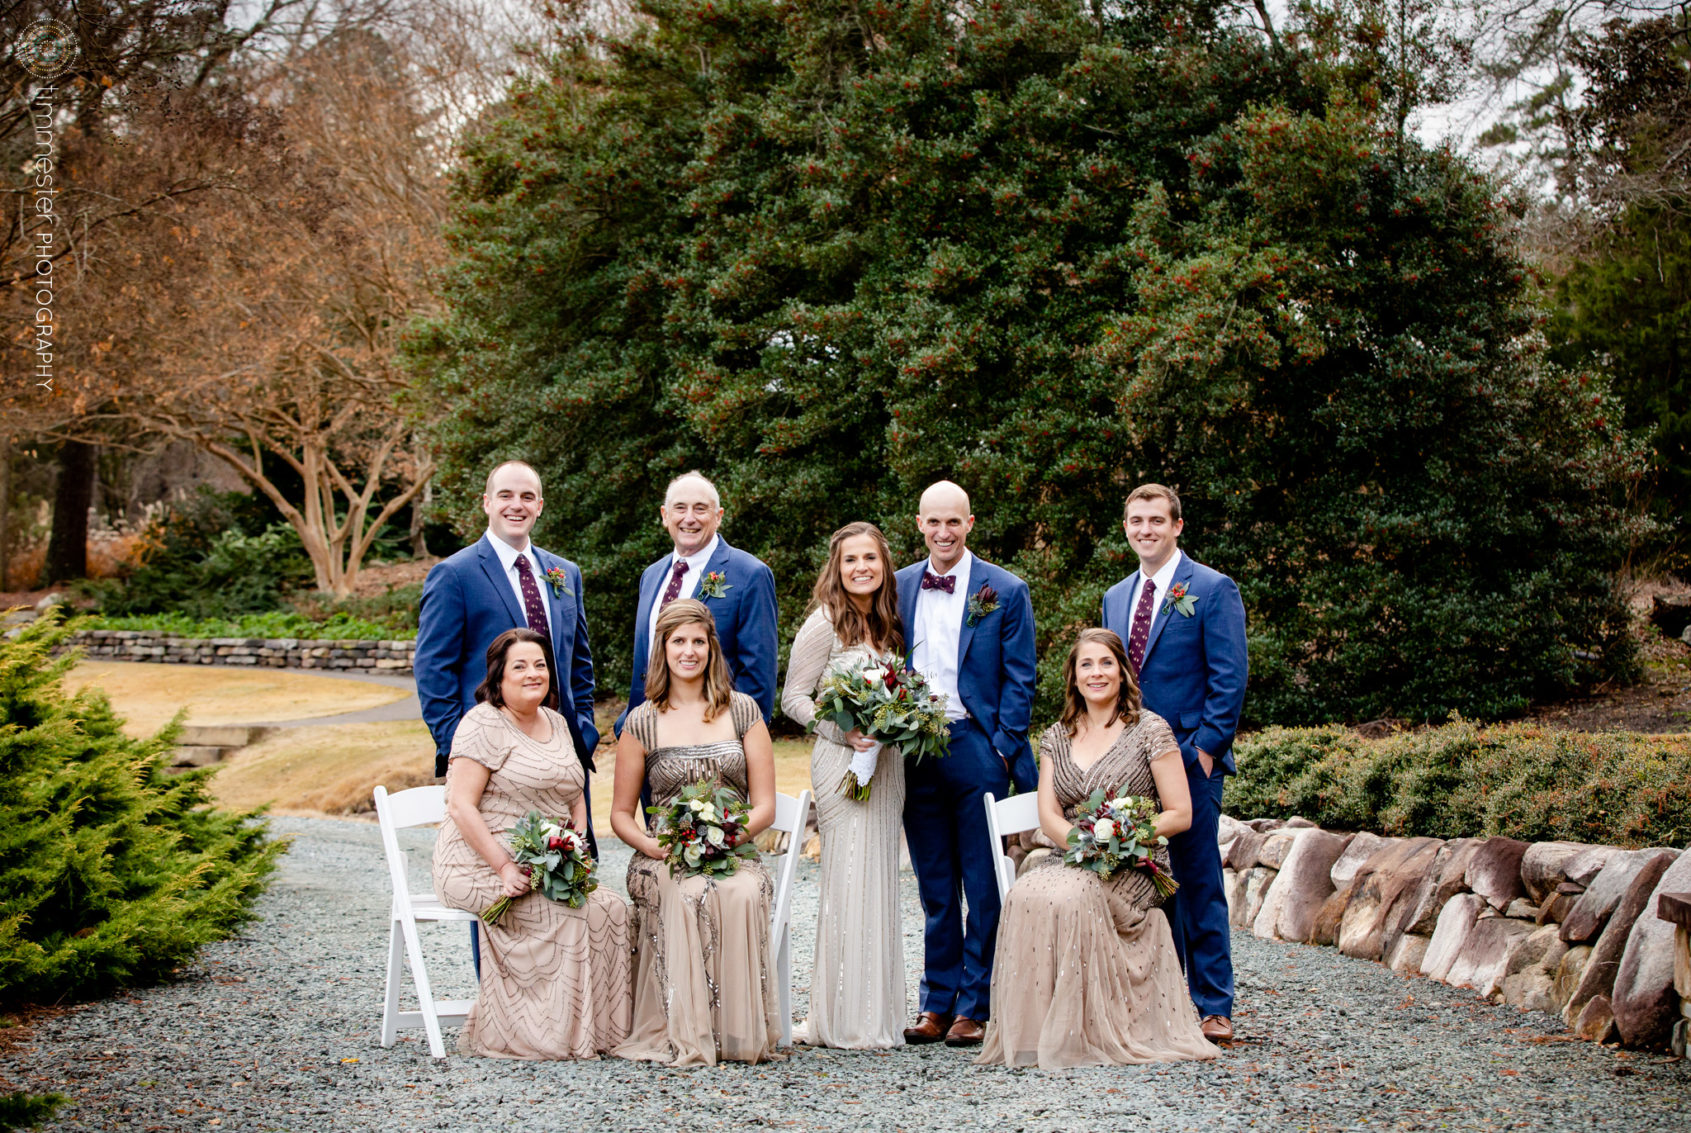 The wedding party from Lauren + Bradley's winter wedding at Chapel Hill Carriage House